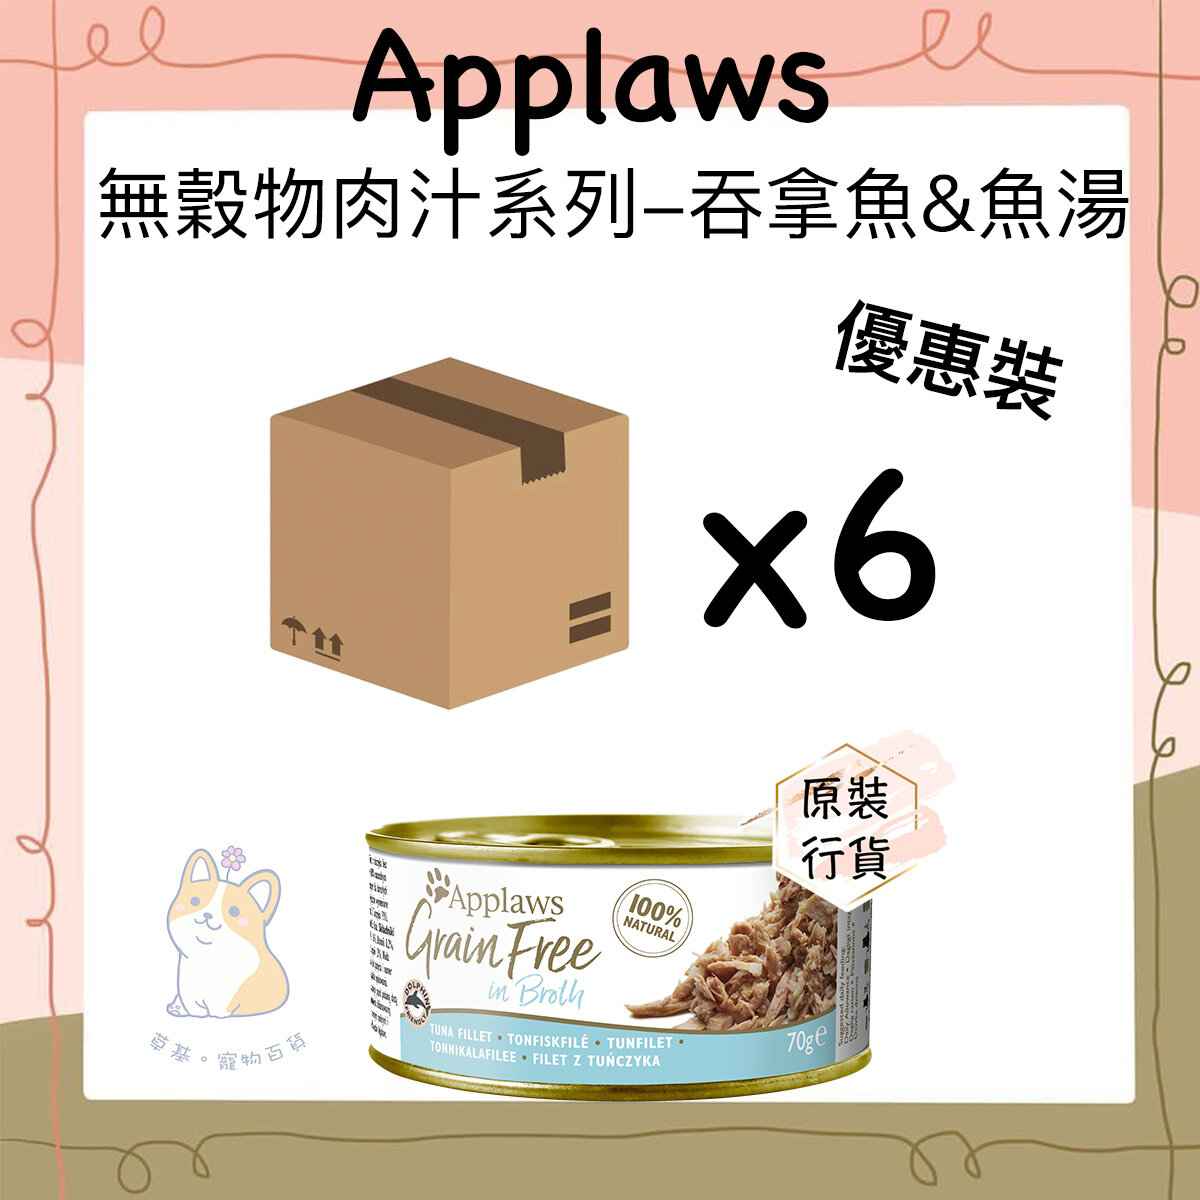 APPLAWS - Grain Free Cat Tin – Tuna Fillet in Broth 70g x 6 Cans